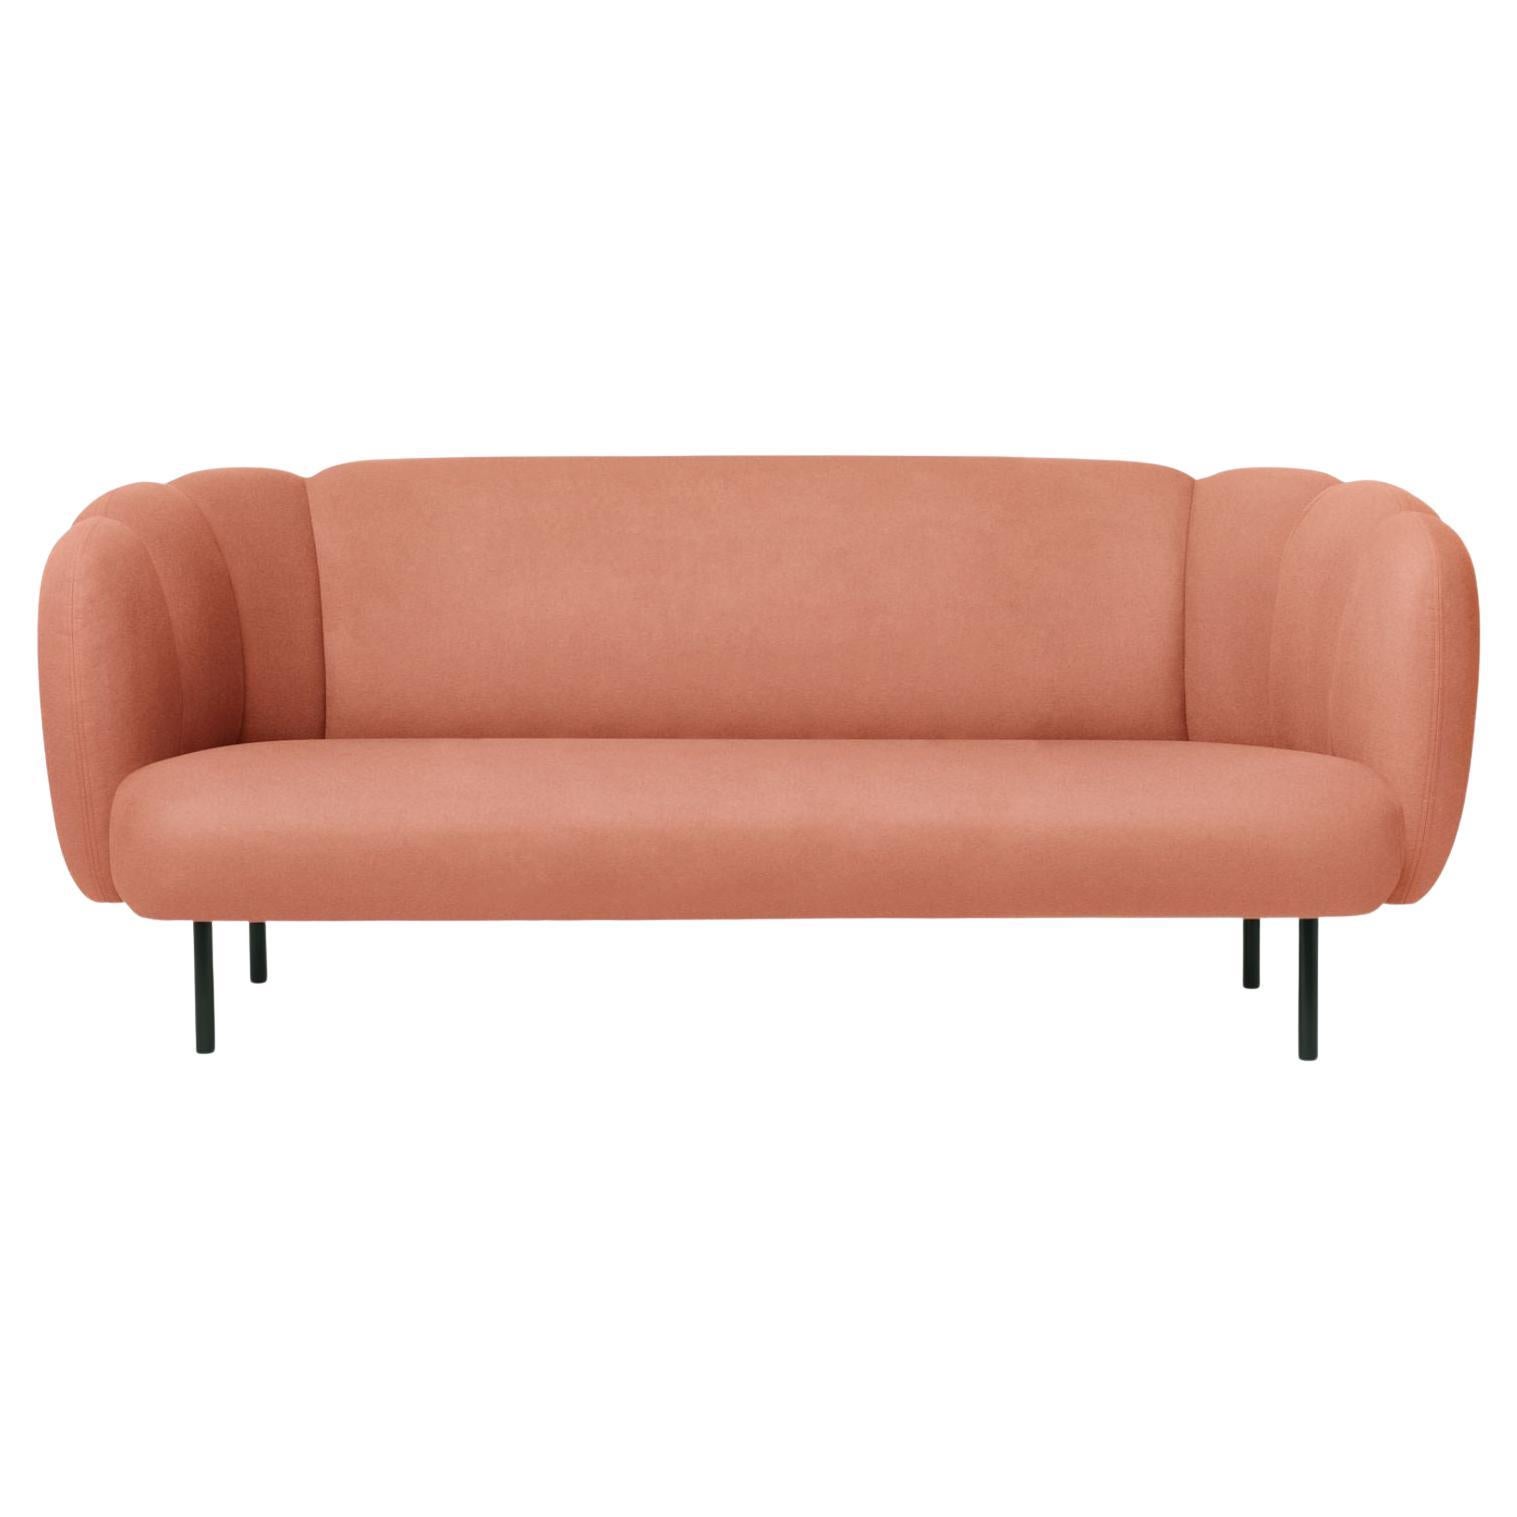 Caper 3 Seater with Stitches Blush by Warm Nordic For Sale